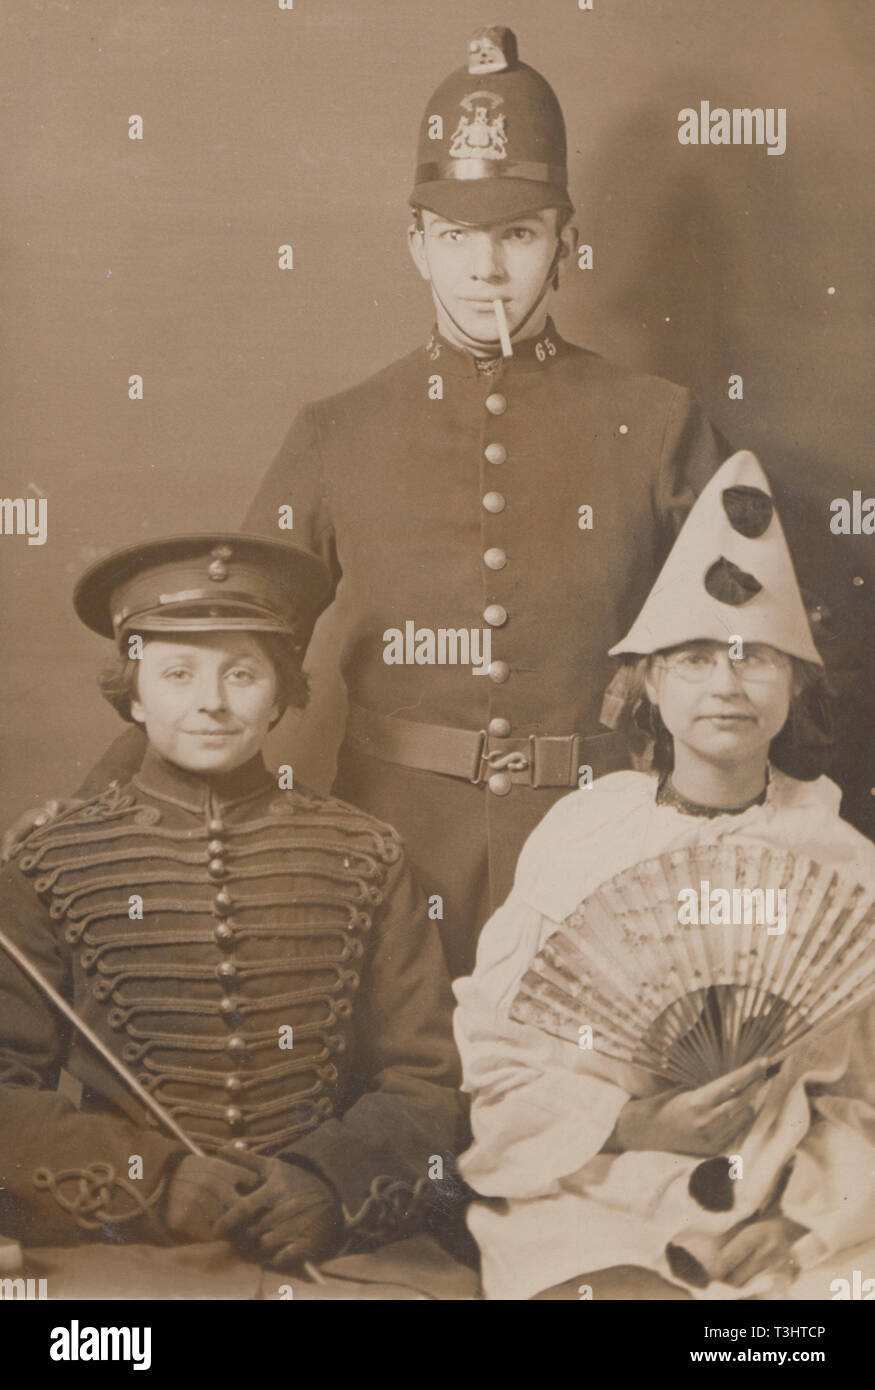 Vintage Edwardian Photographic Postcard Showing Three People Dressed Up in Theatrical Costumes. Soldier, Policeman and Pierrot Stock Photo